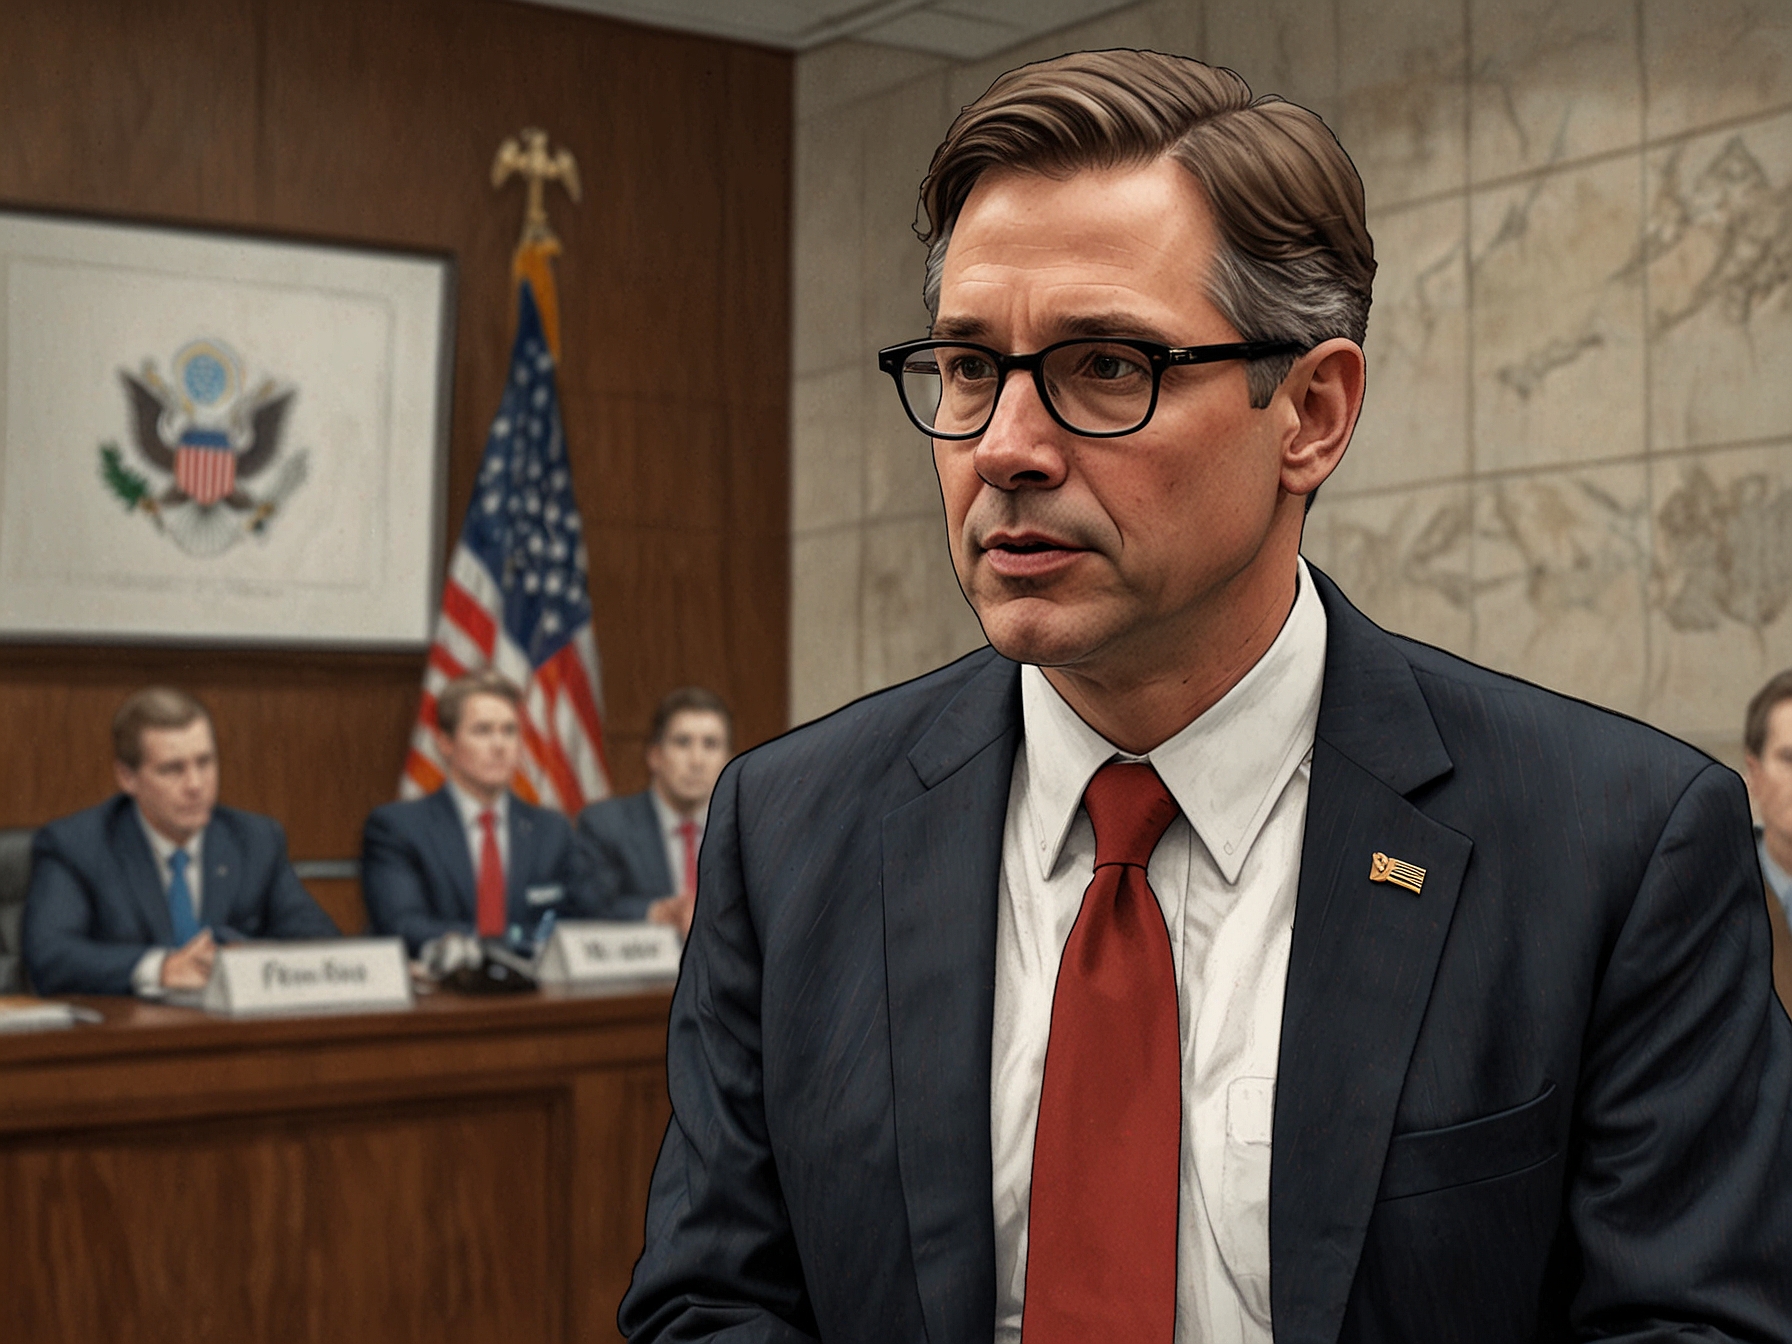 Image of Derek Chollet addressing Pentagon staff, representing his appointment as Chief of Staff and his role in modernizing defense strategies while fostering coordination with the State Department.